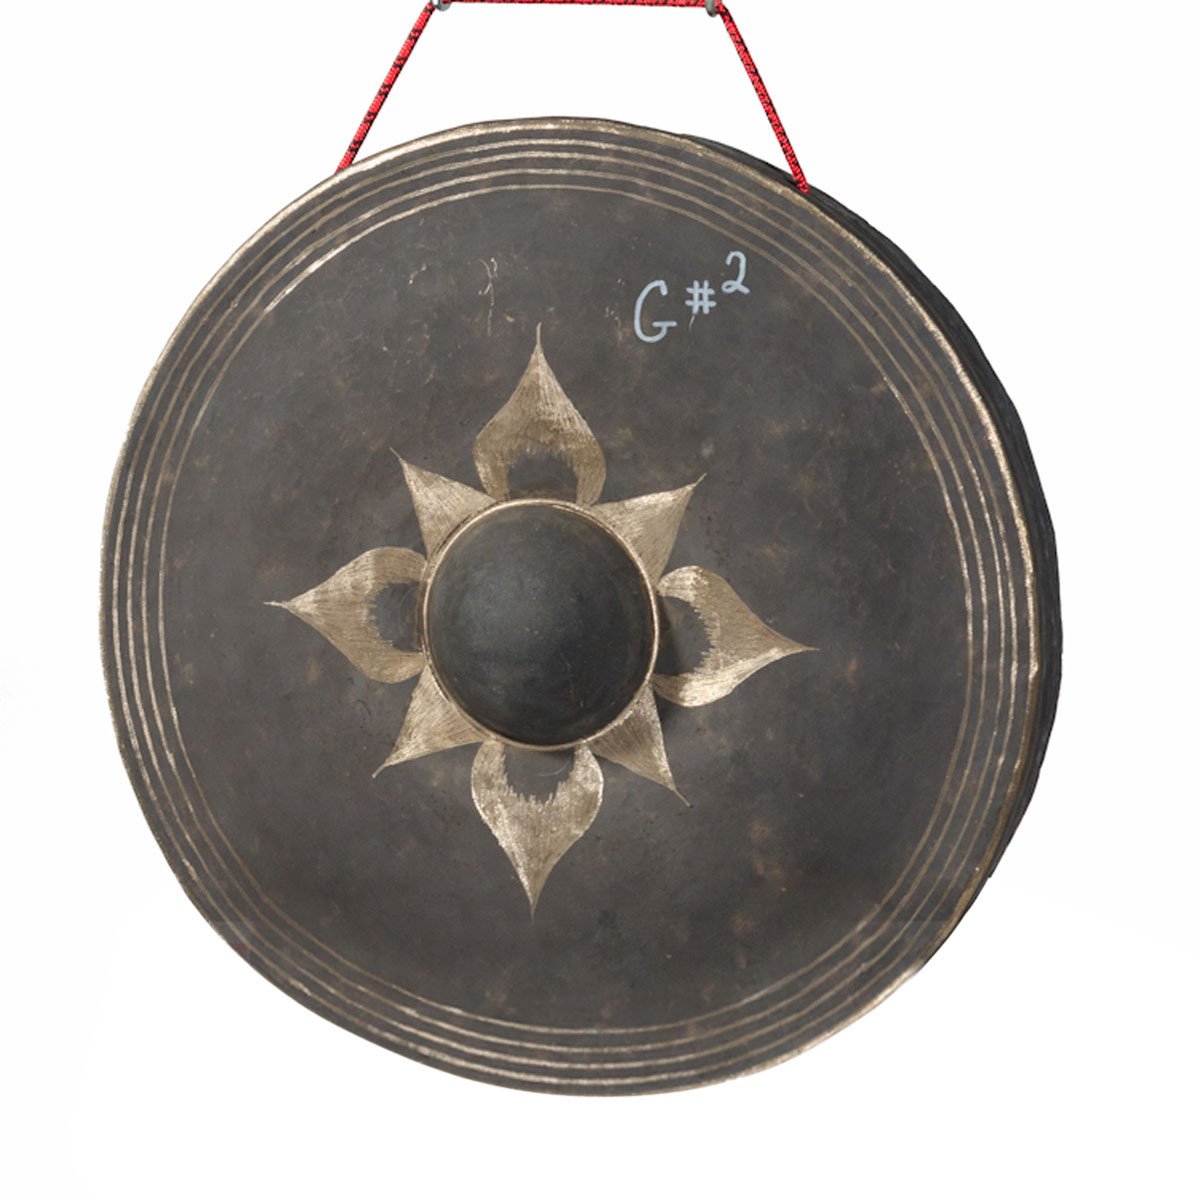 G#2 Tuned Thai Gong 24"